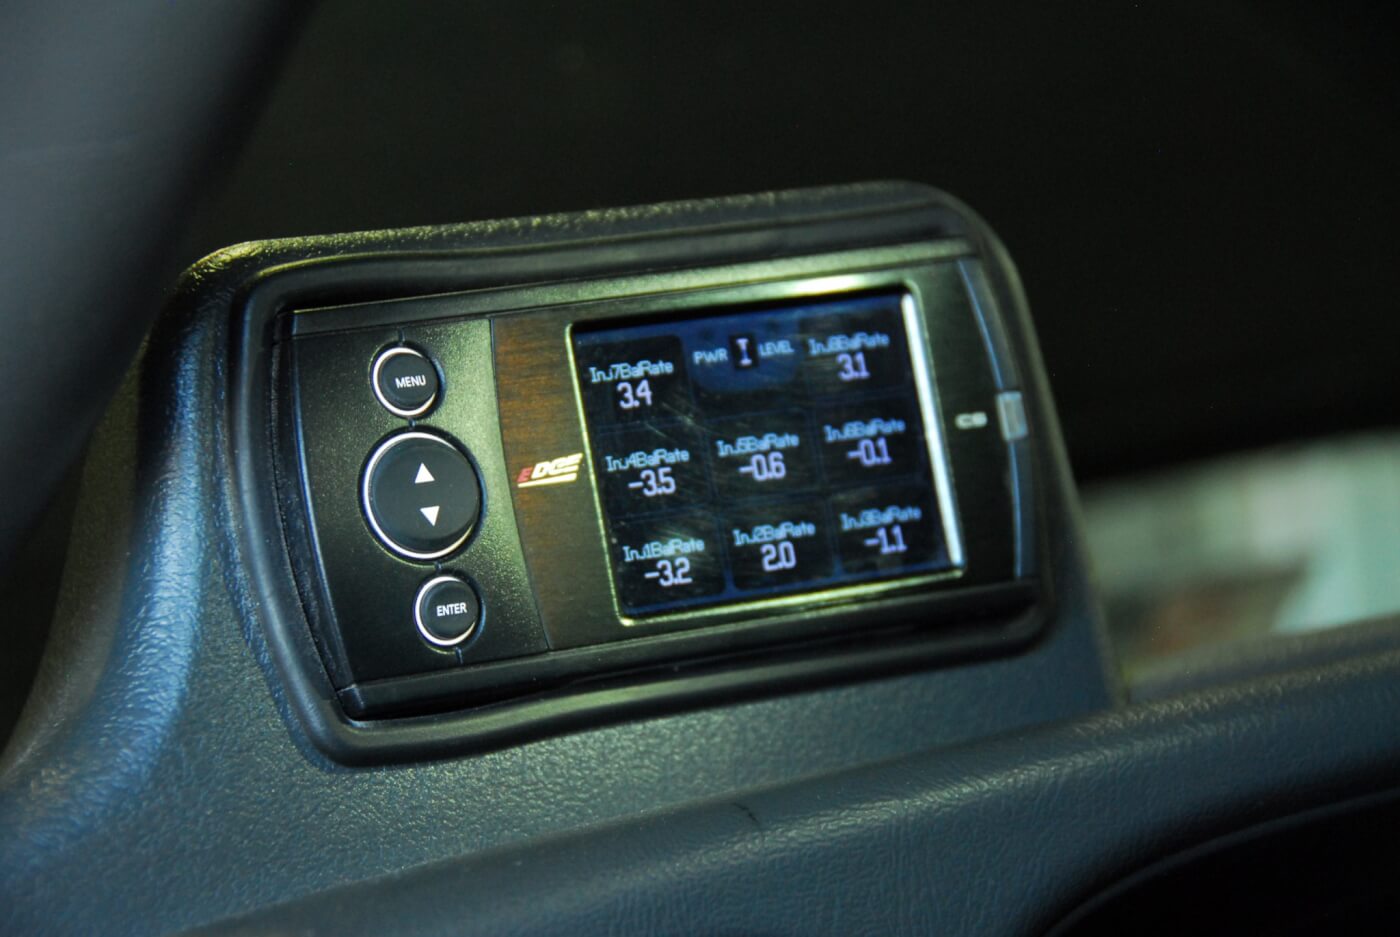 4. The Edge tuner installed on this Chevy also provides data on the injection balance rate of the Duramax.